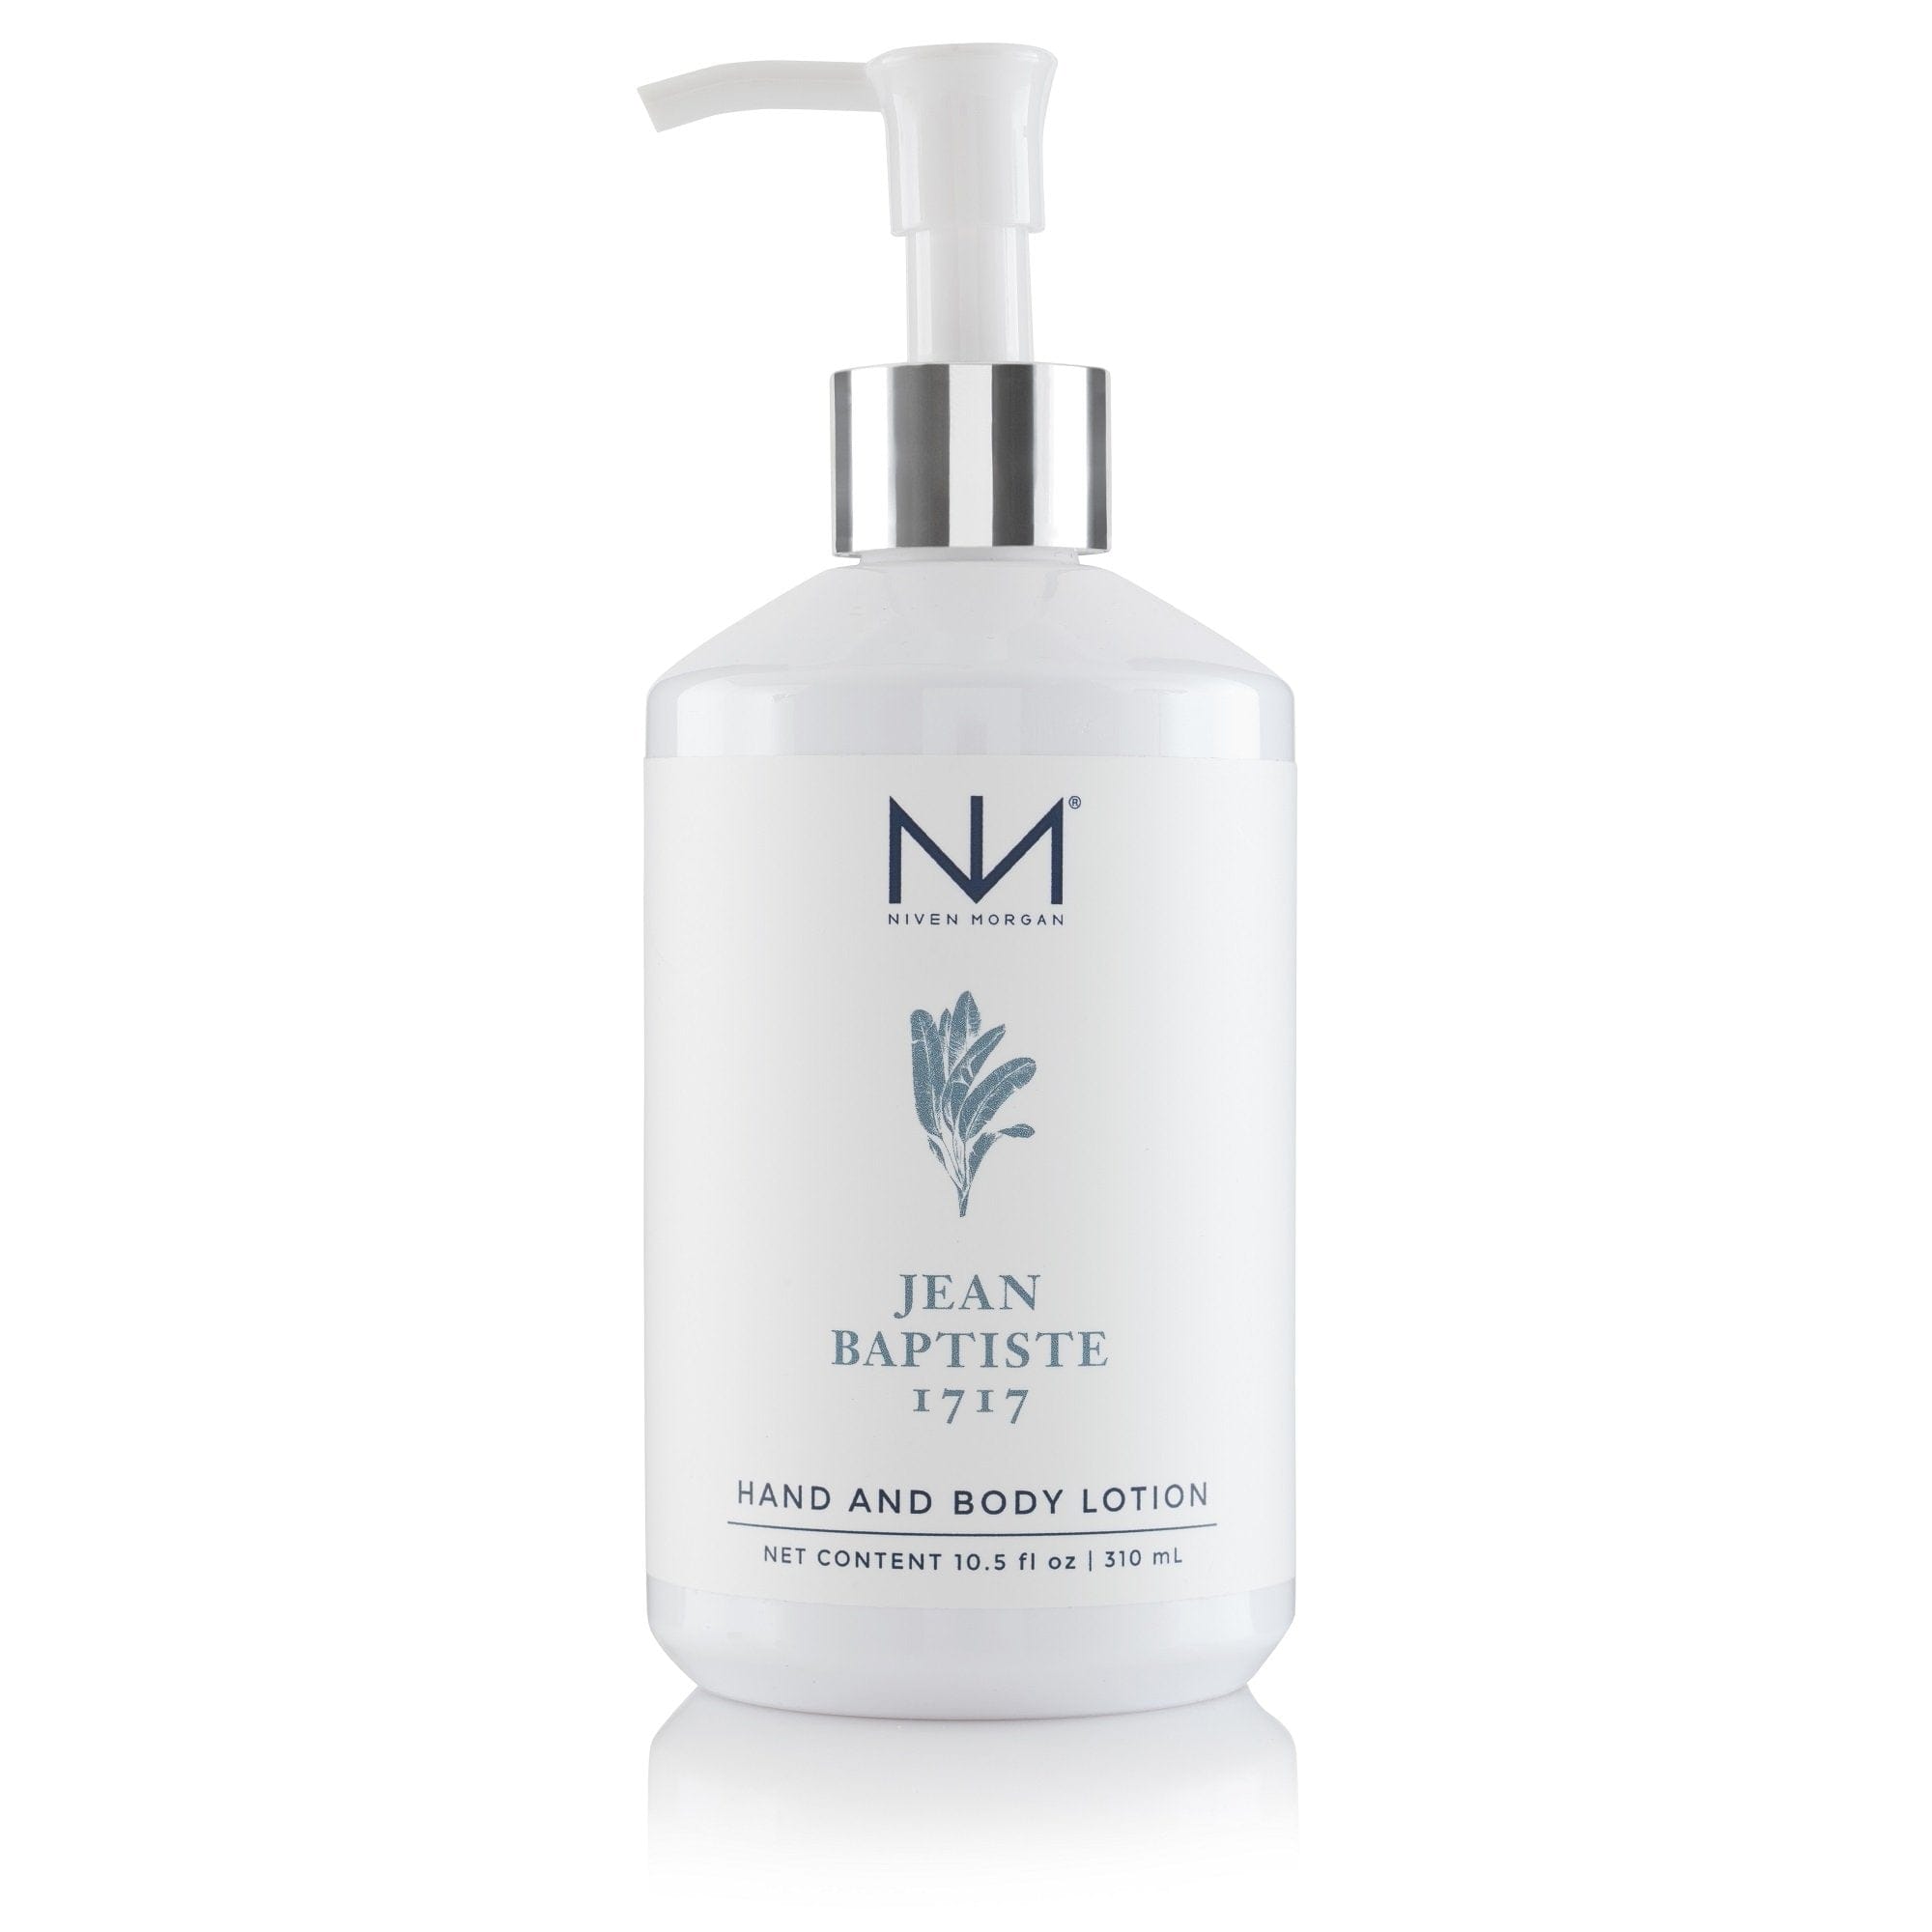 Niven Morgan Niven Morgan Jean Baptiste Hand and Body Lotion - Little Miss Muffin Children & Home